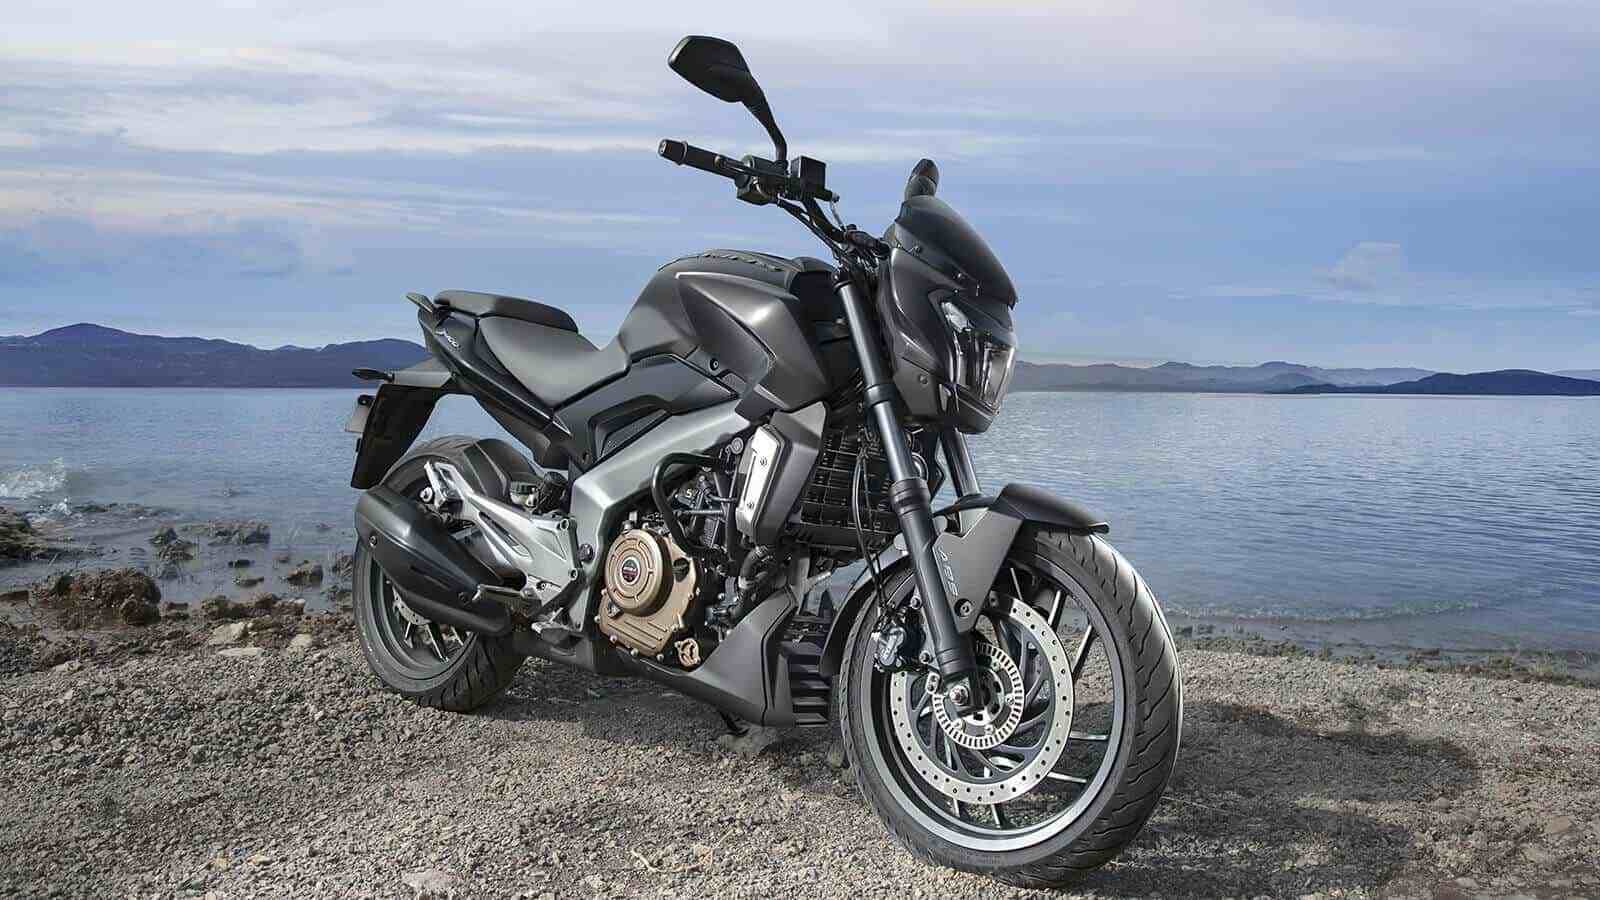 Bajaj Dominar 400 BS6 Officially Launched At Price 1.90 lakh